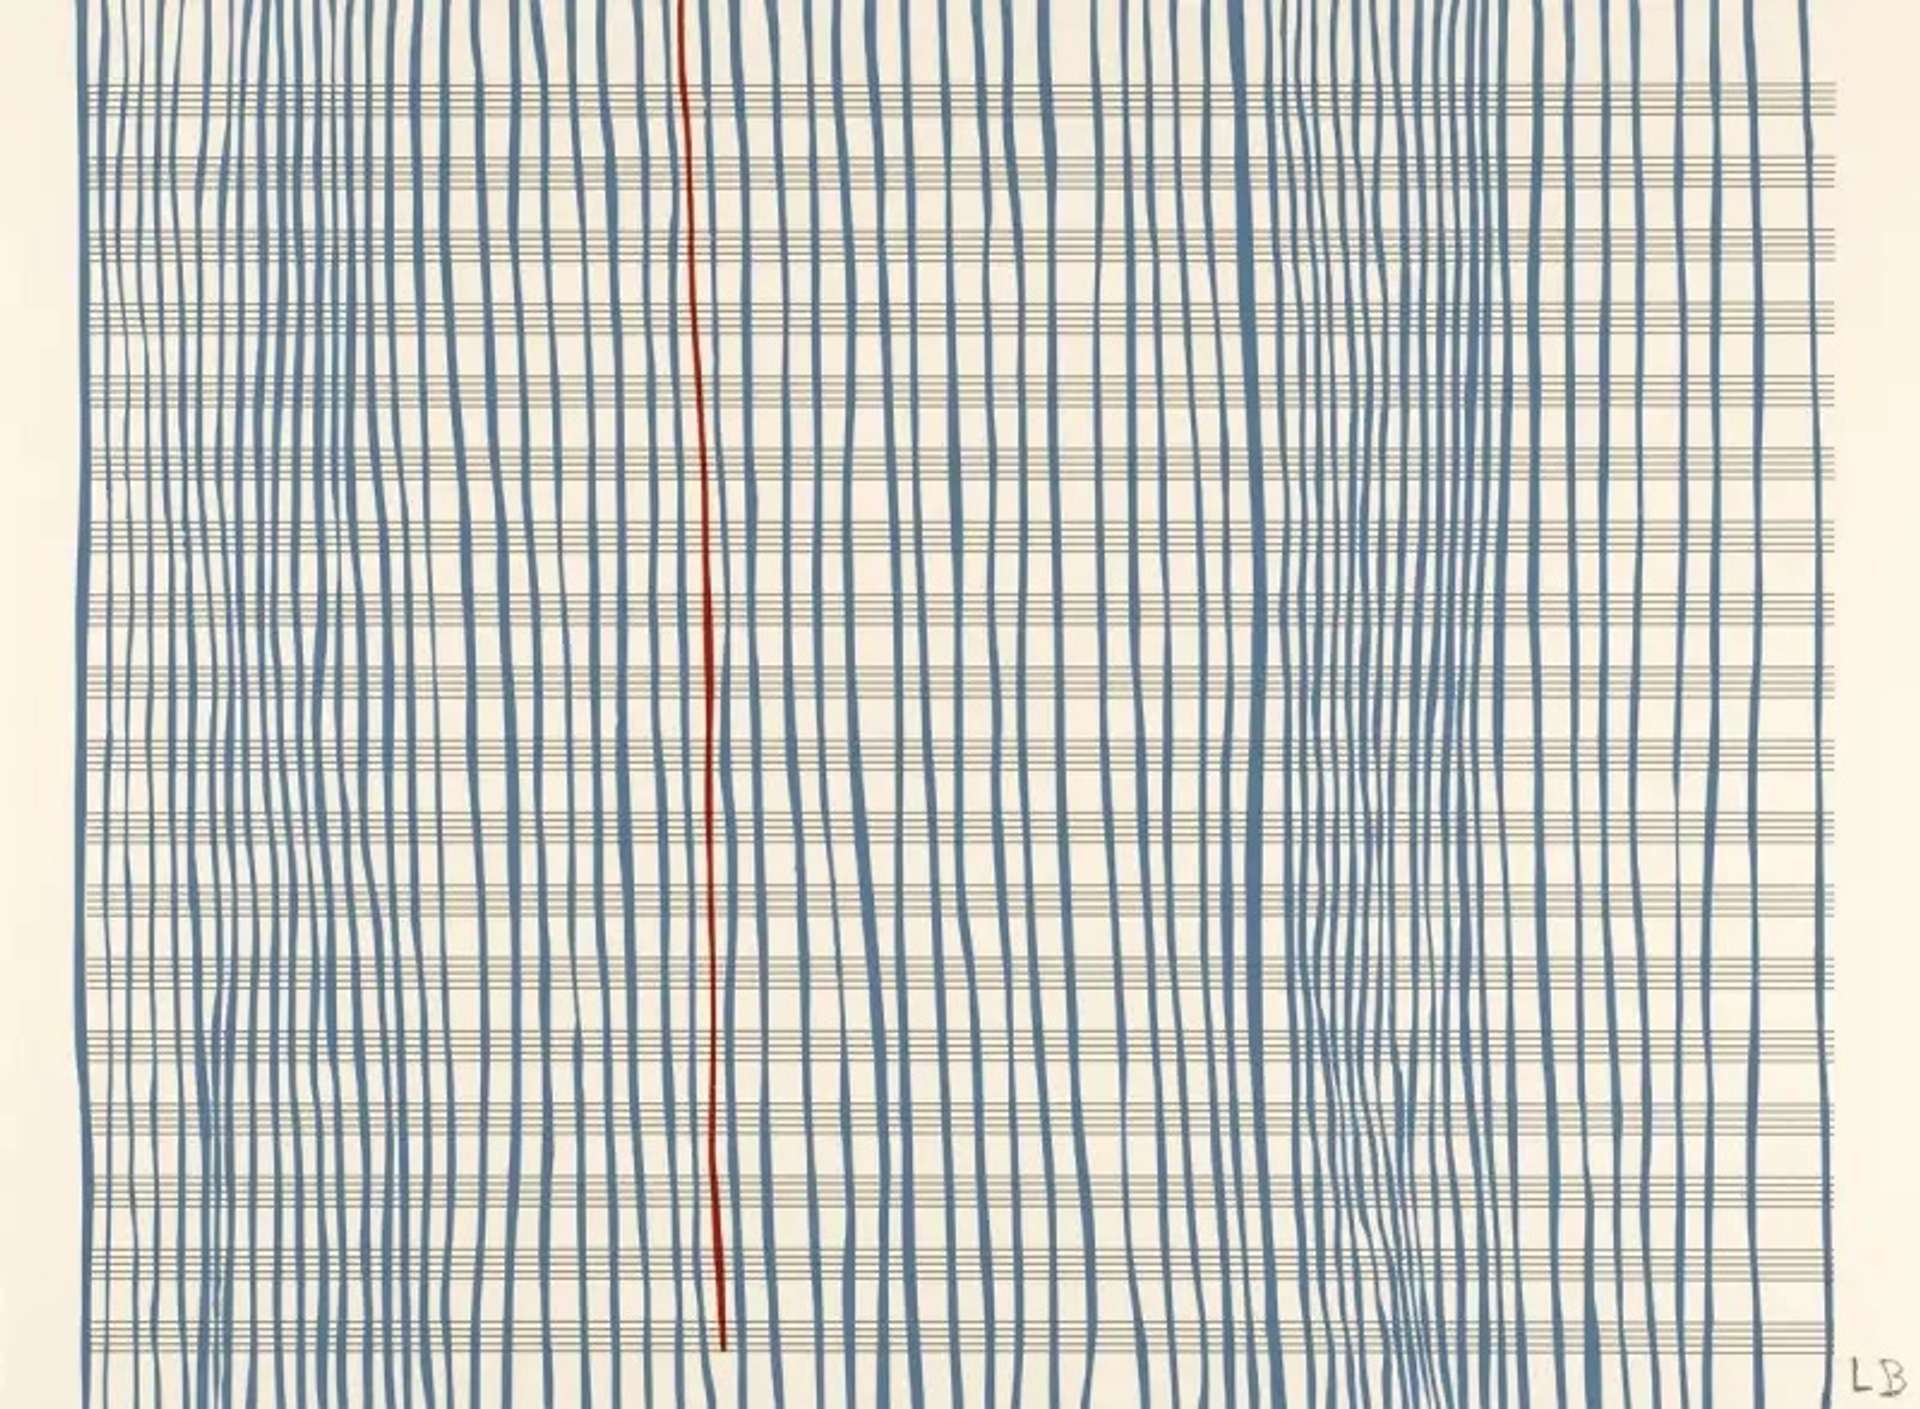 Louise Bourgeois’ Untitled #1. A screenprint of vertical blue lines against a pattern of horizontal lines